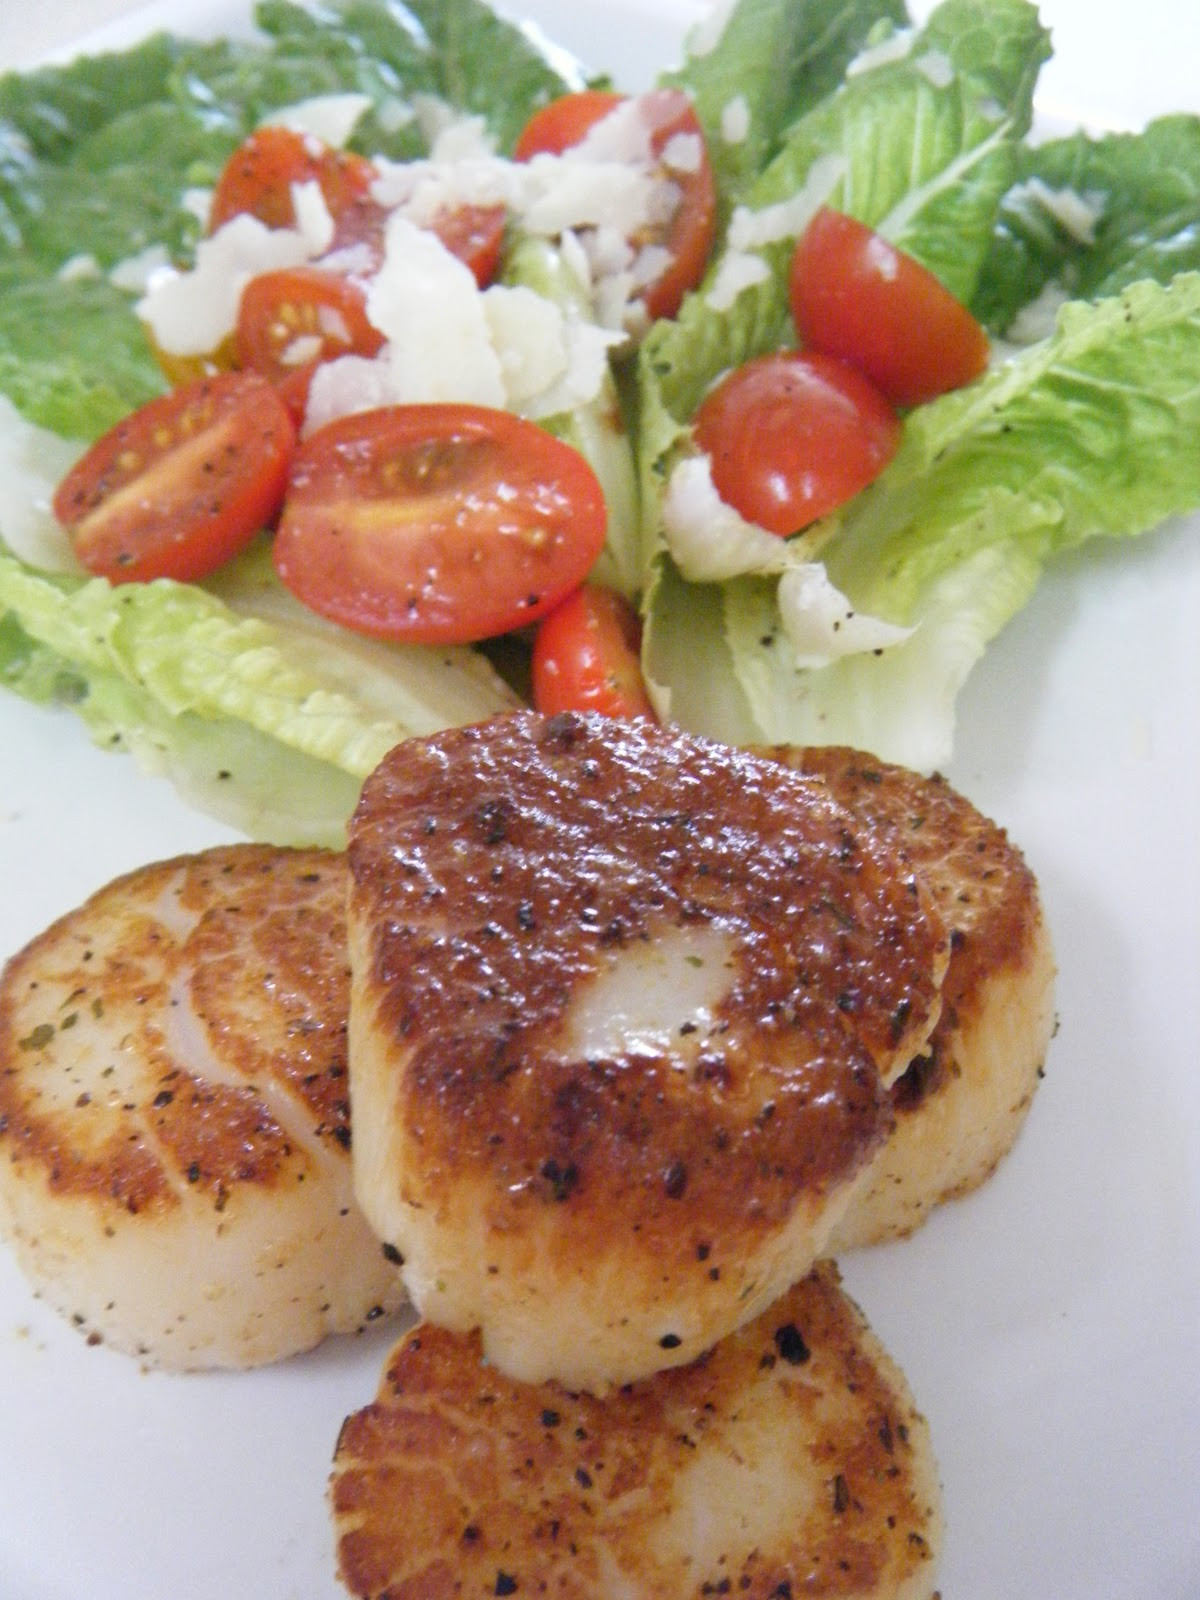 Scallops Side Dishes
 A Side Dish of Sanity Diver Scallops with Parmesan and